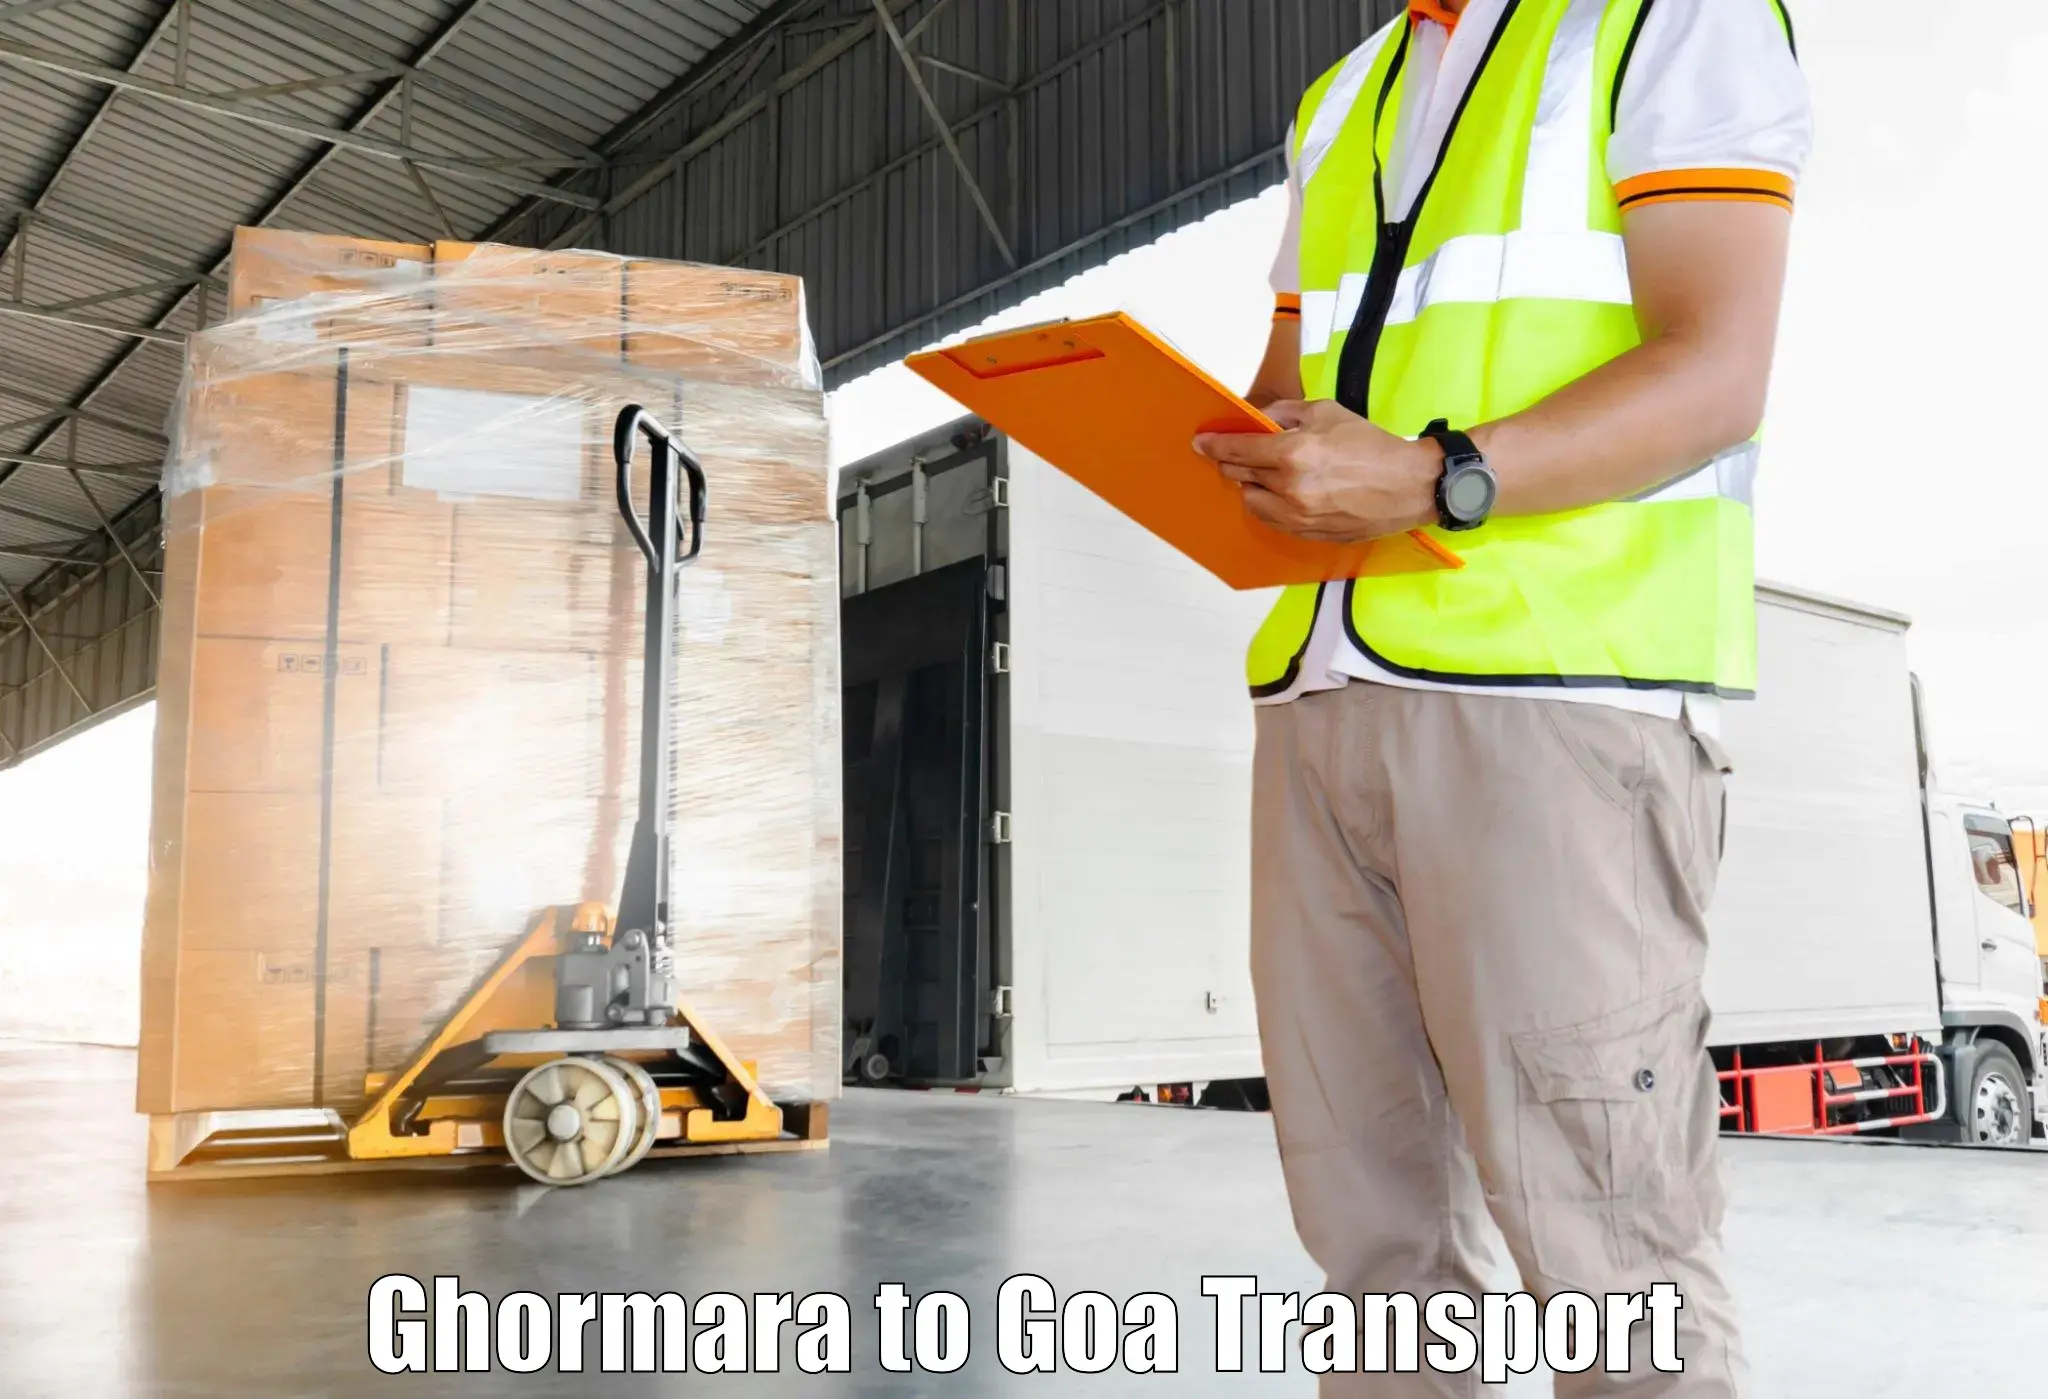 Express transport services in Ghormara to Bardez